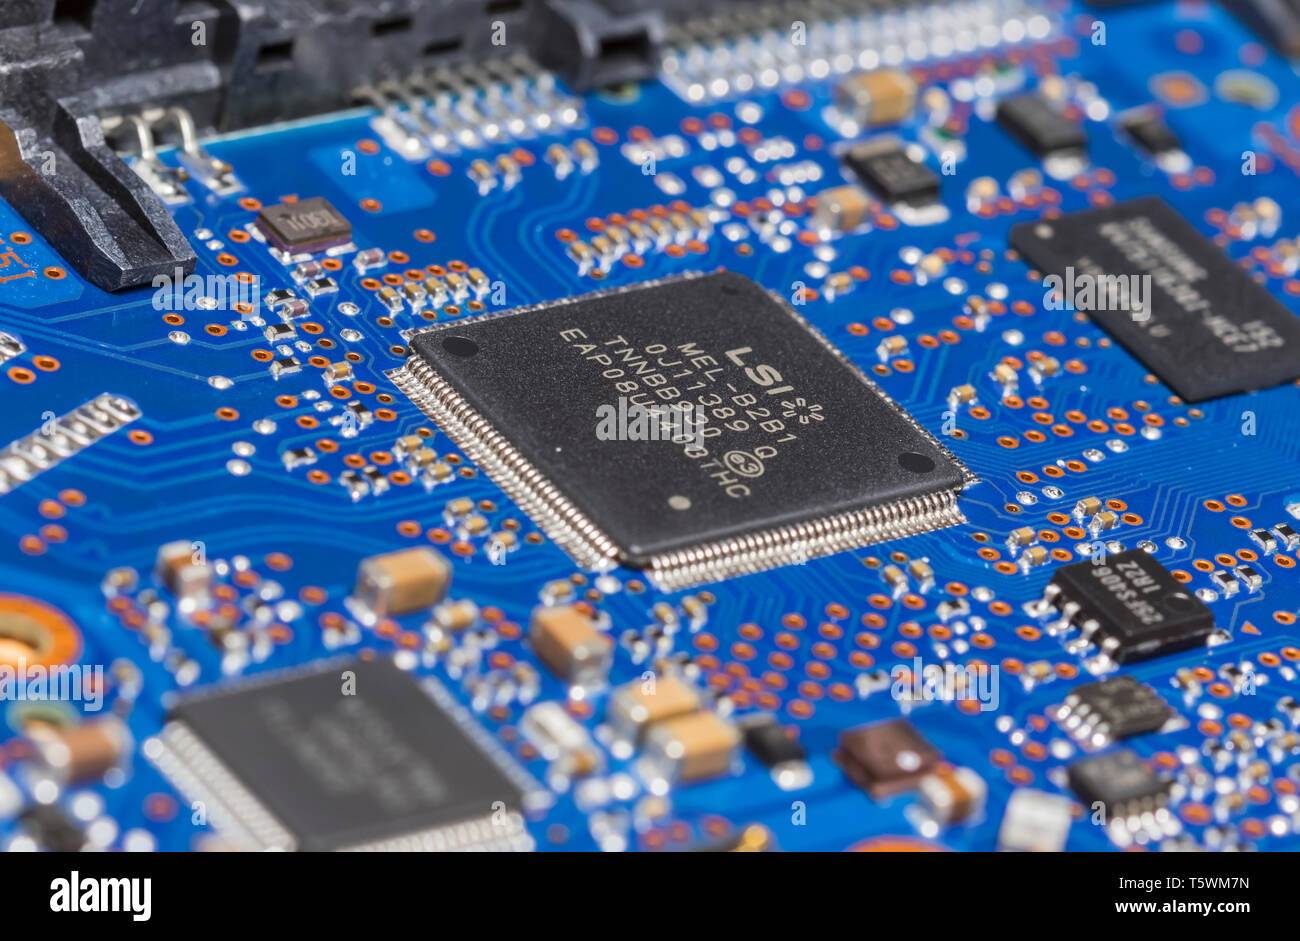 Macro of Integrated circuits and other surface mount (SMT) components mounted on a PCB (Printed Circuit Board). Stock Photo